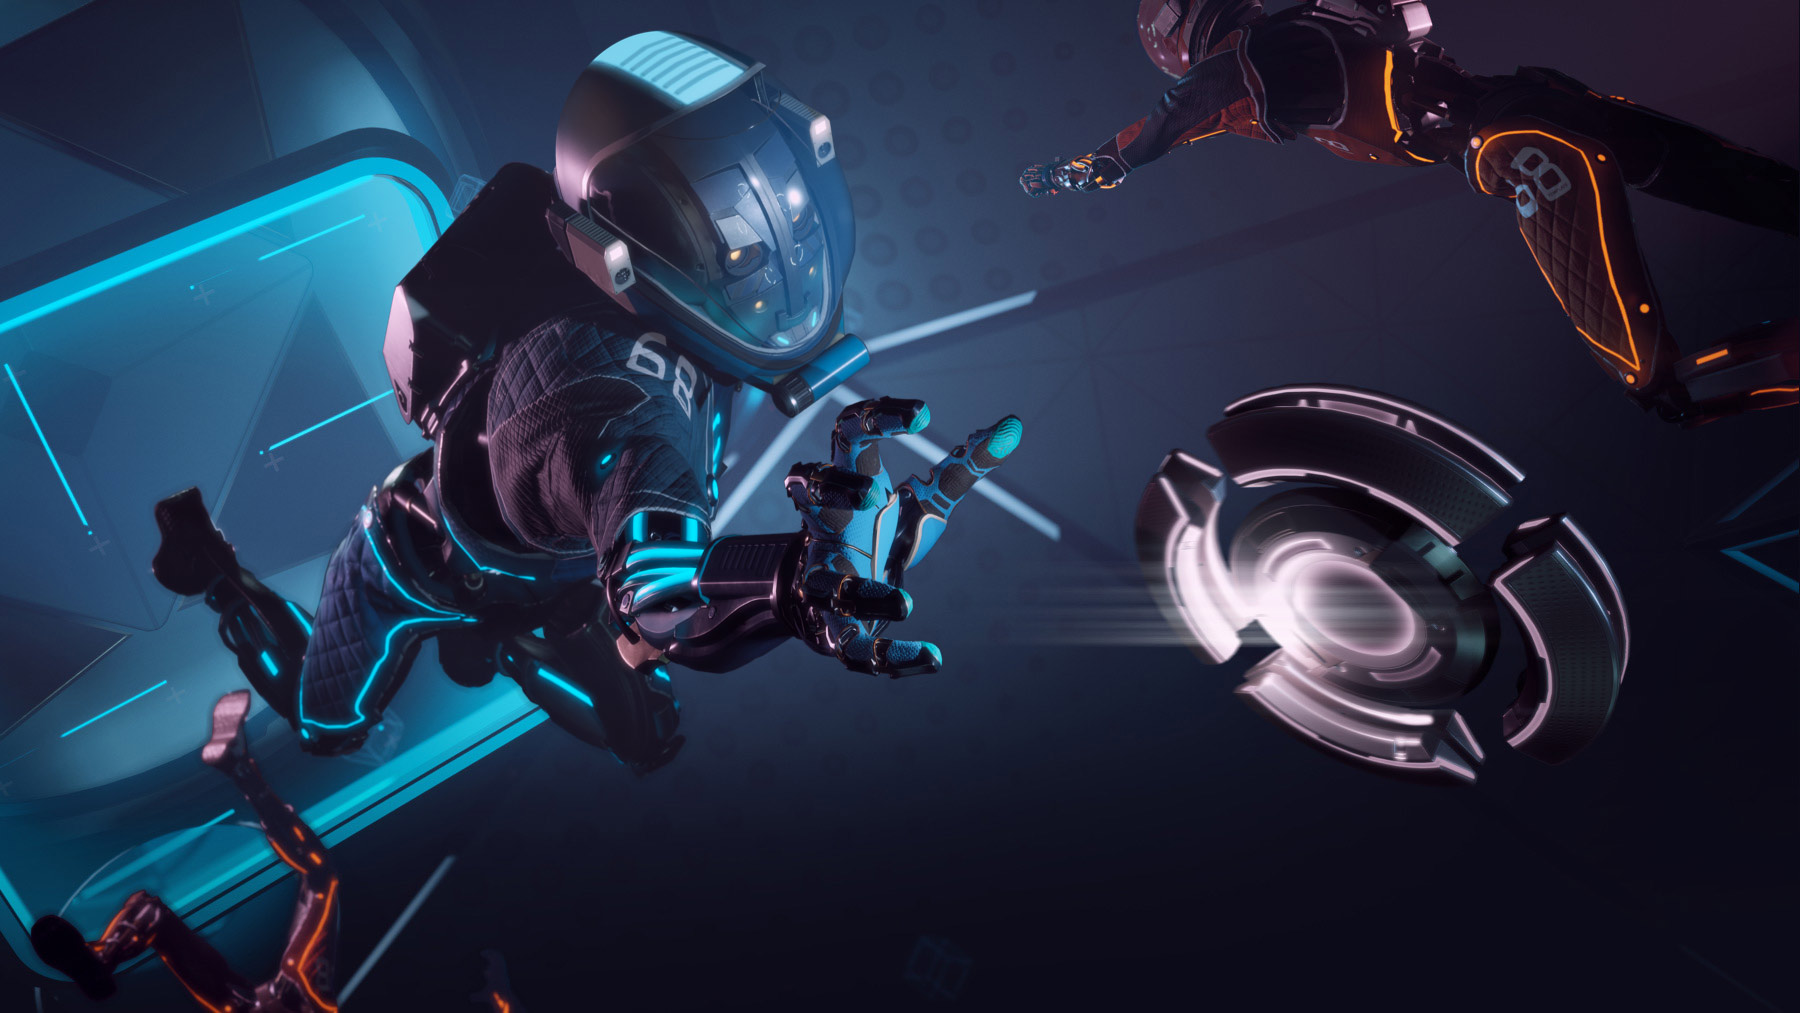 Only 1 Day Remains to Play 'Echo VR' Before Servers Go Dark